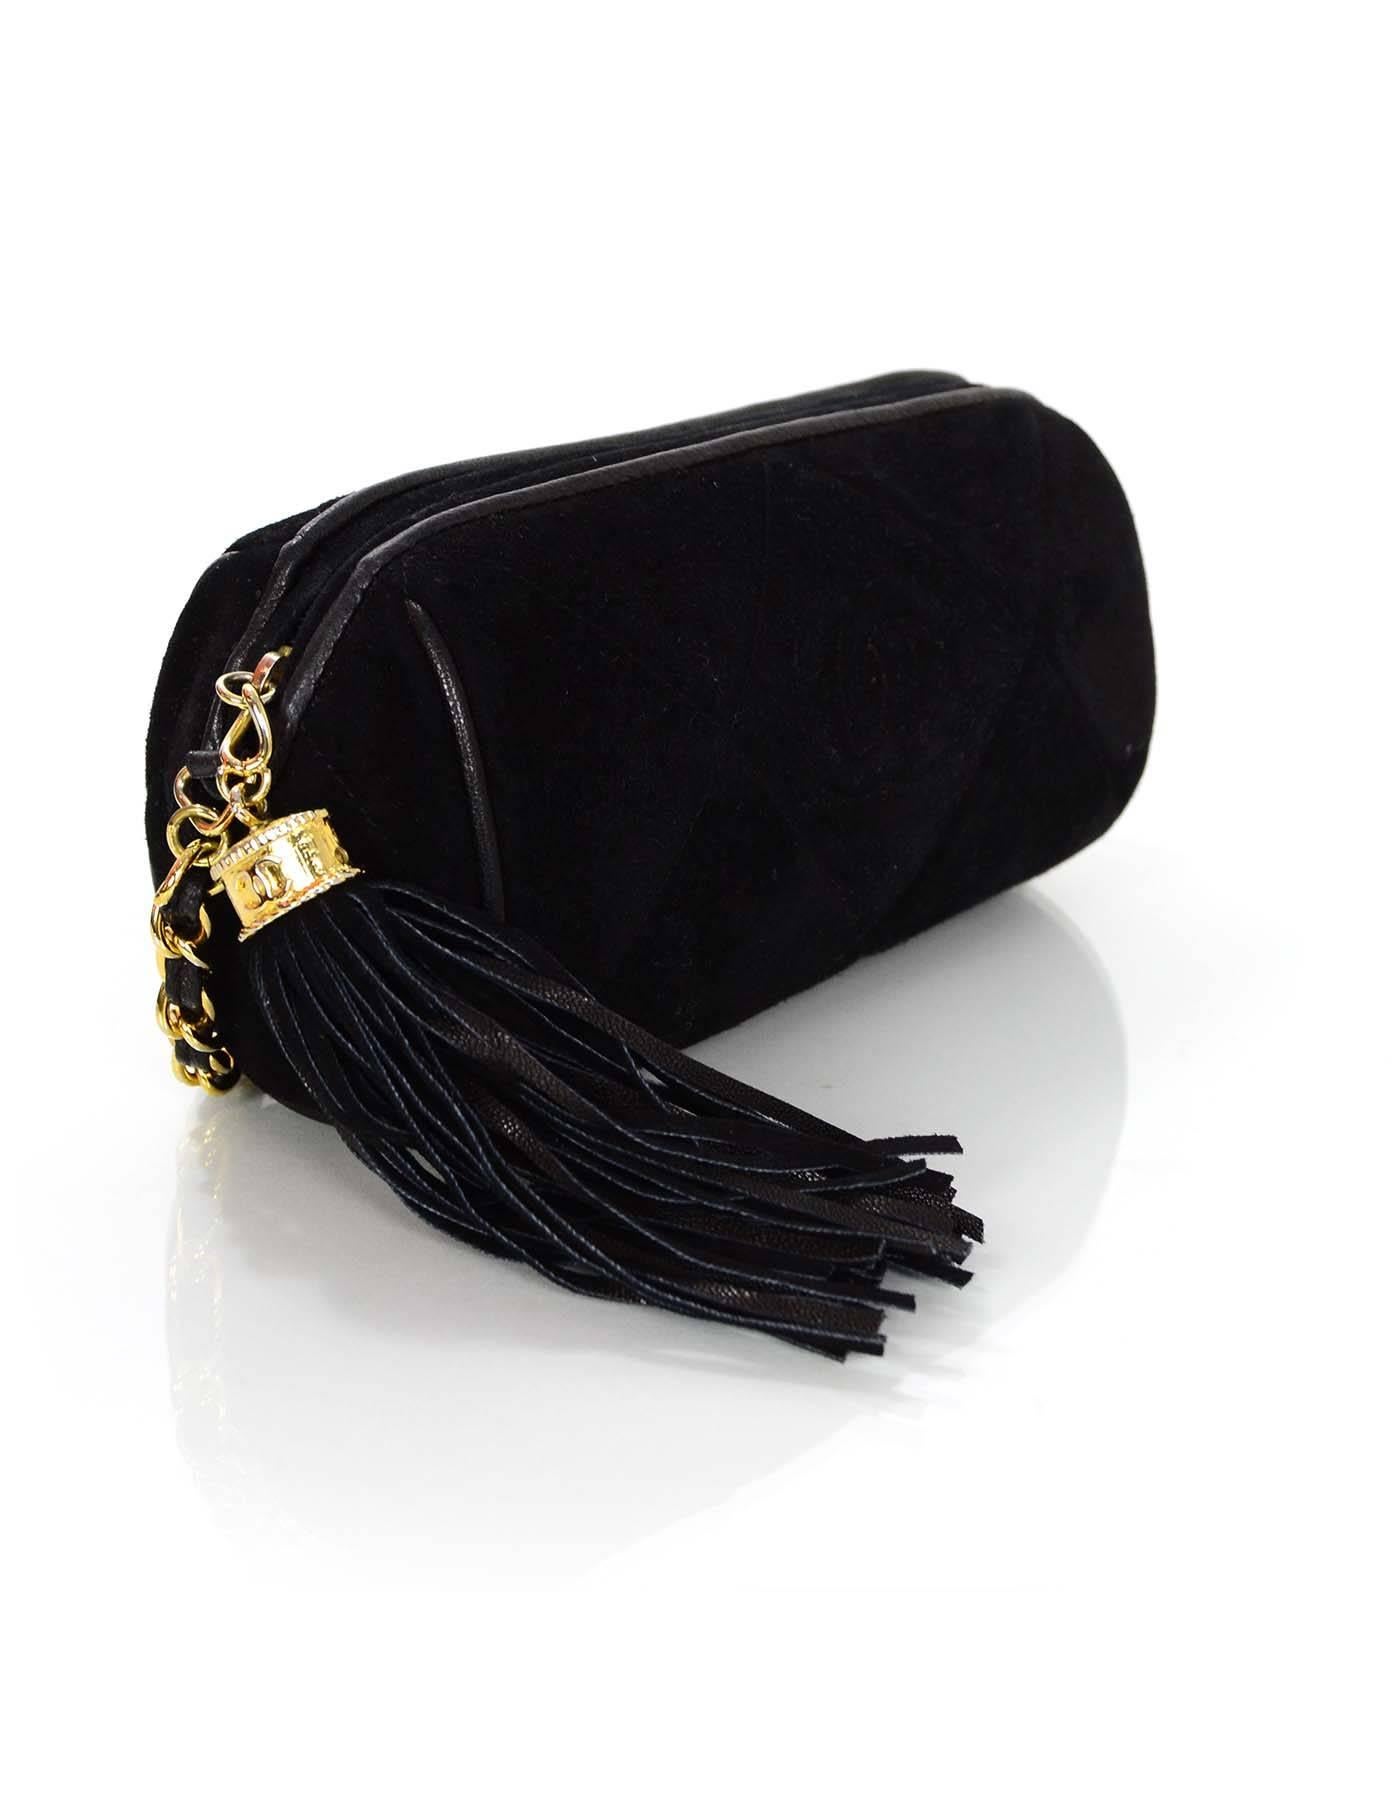 Chanel Quilted Suede Mini Barrel Bag  
Features black tassel and goldtone CC charm

Made In: Italy
Year of Production: 1986-1988
Color: Black
Hardware: Goldtone
Materials: Suede
Lining: Black lining
Closure/Opening: Zip across top
Exterior